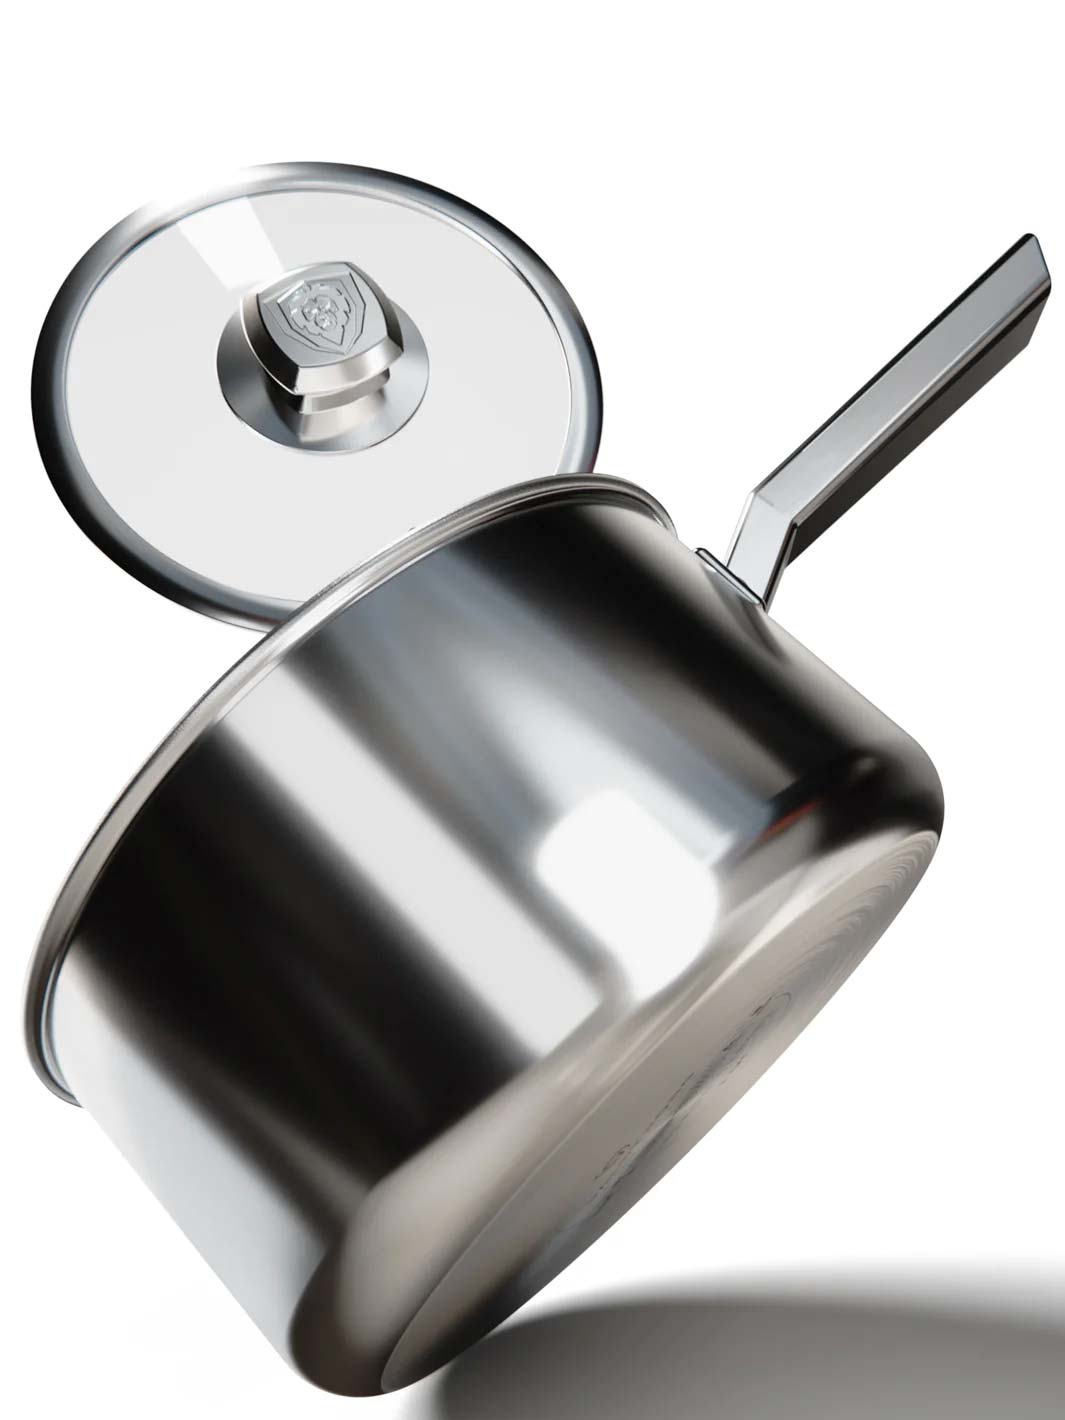 All You Need to Know About Stainless Steel Pots and Pans – Dalstrong